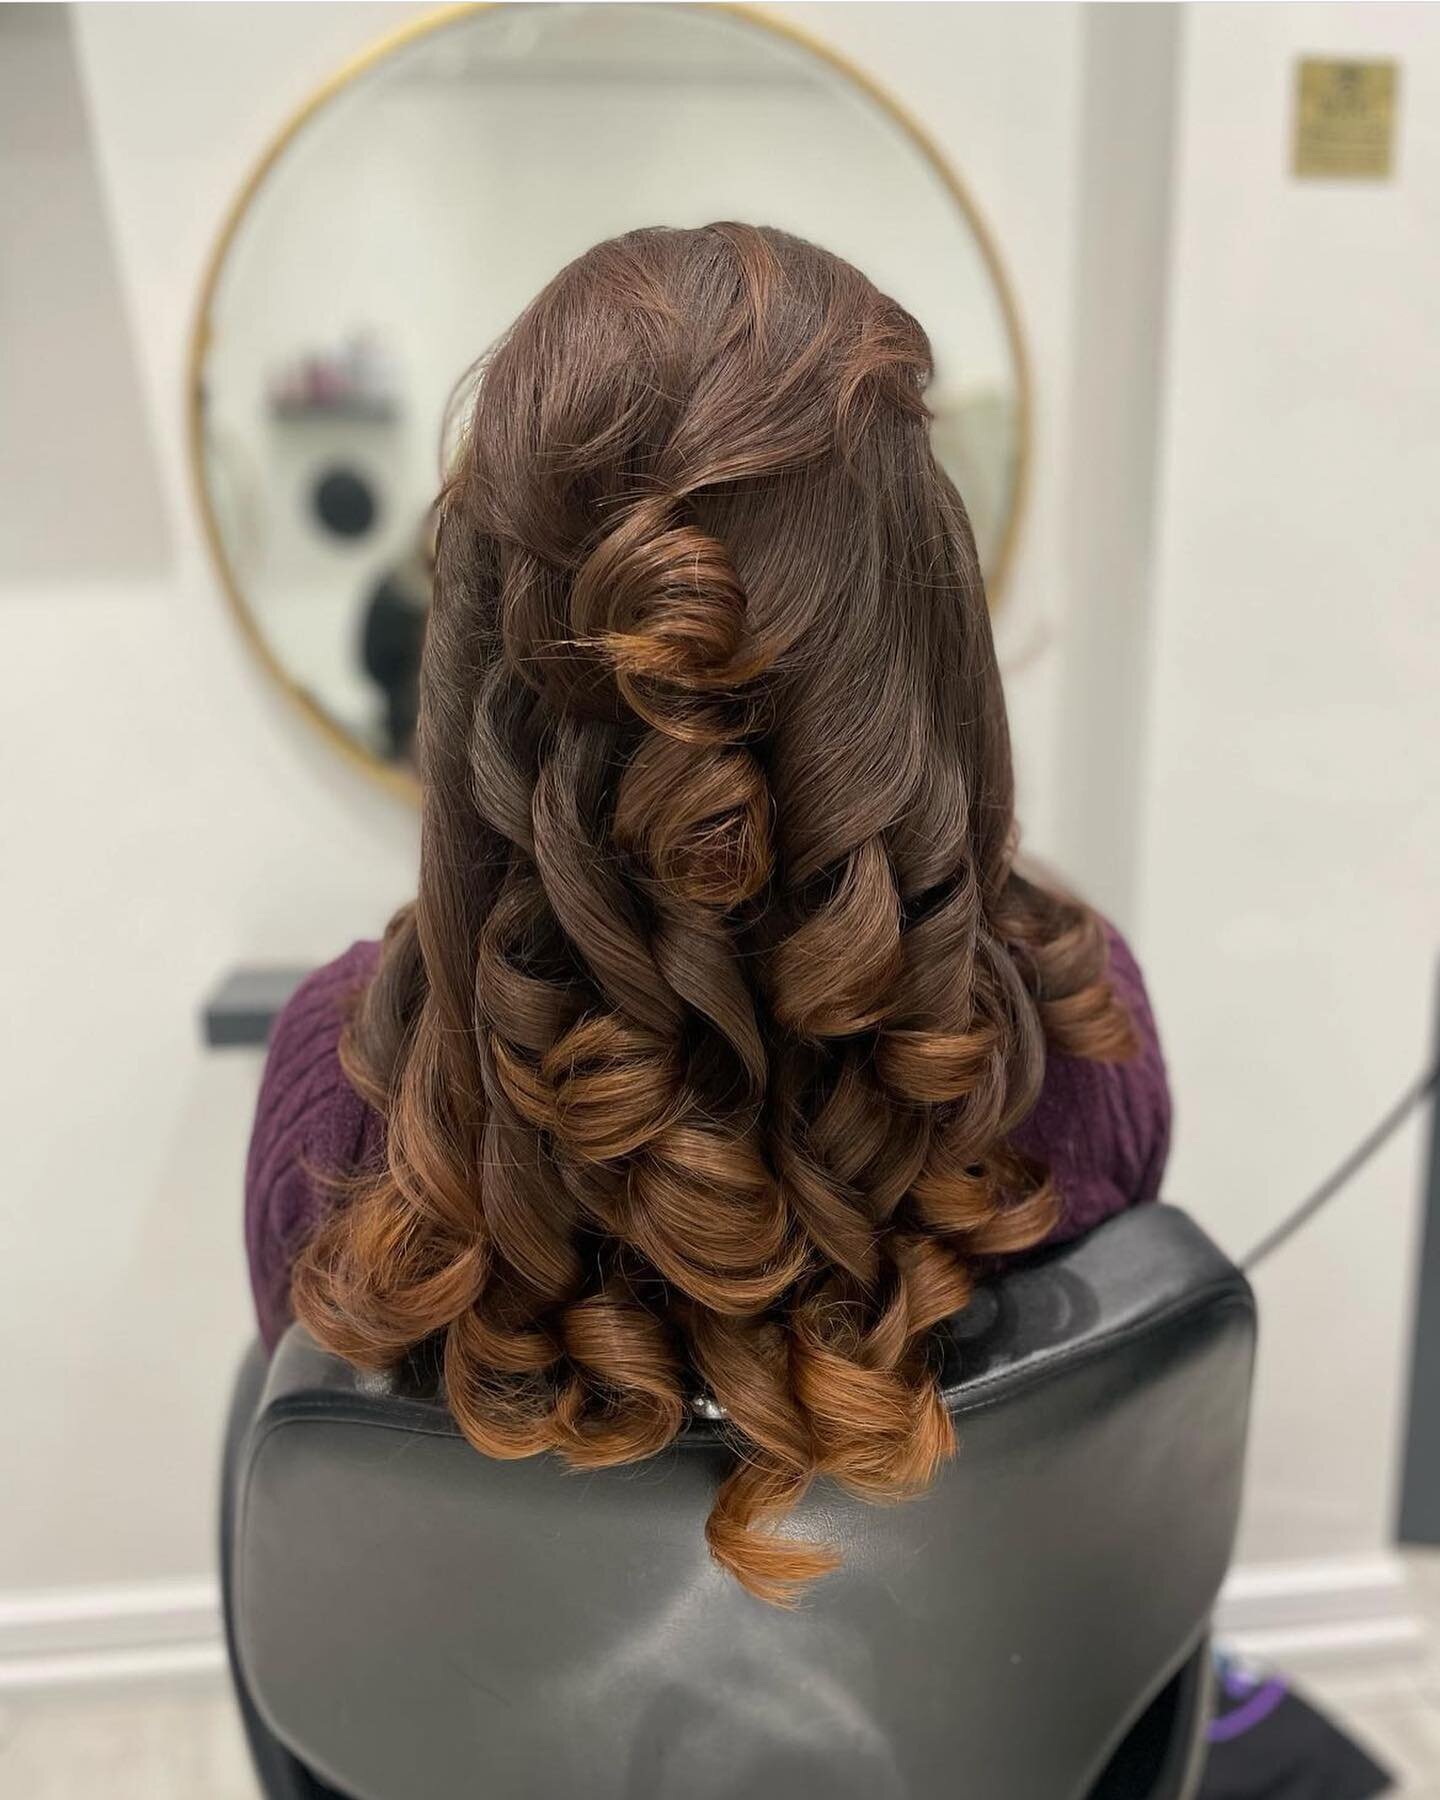 Have you had a bouncy blow by @hairbymalisha yet?? Check out our post regarding the blowdry club 🤍 

#blowdry #blowdrybar #hairdresser #hairsalon #hairgoals #bouncyblowdry #bighair #hairgoalsachieved #blowdrytips #blowdrycurls #pincurls #salonhair #